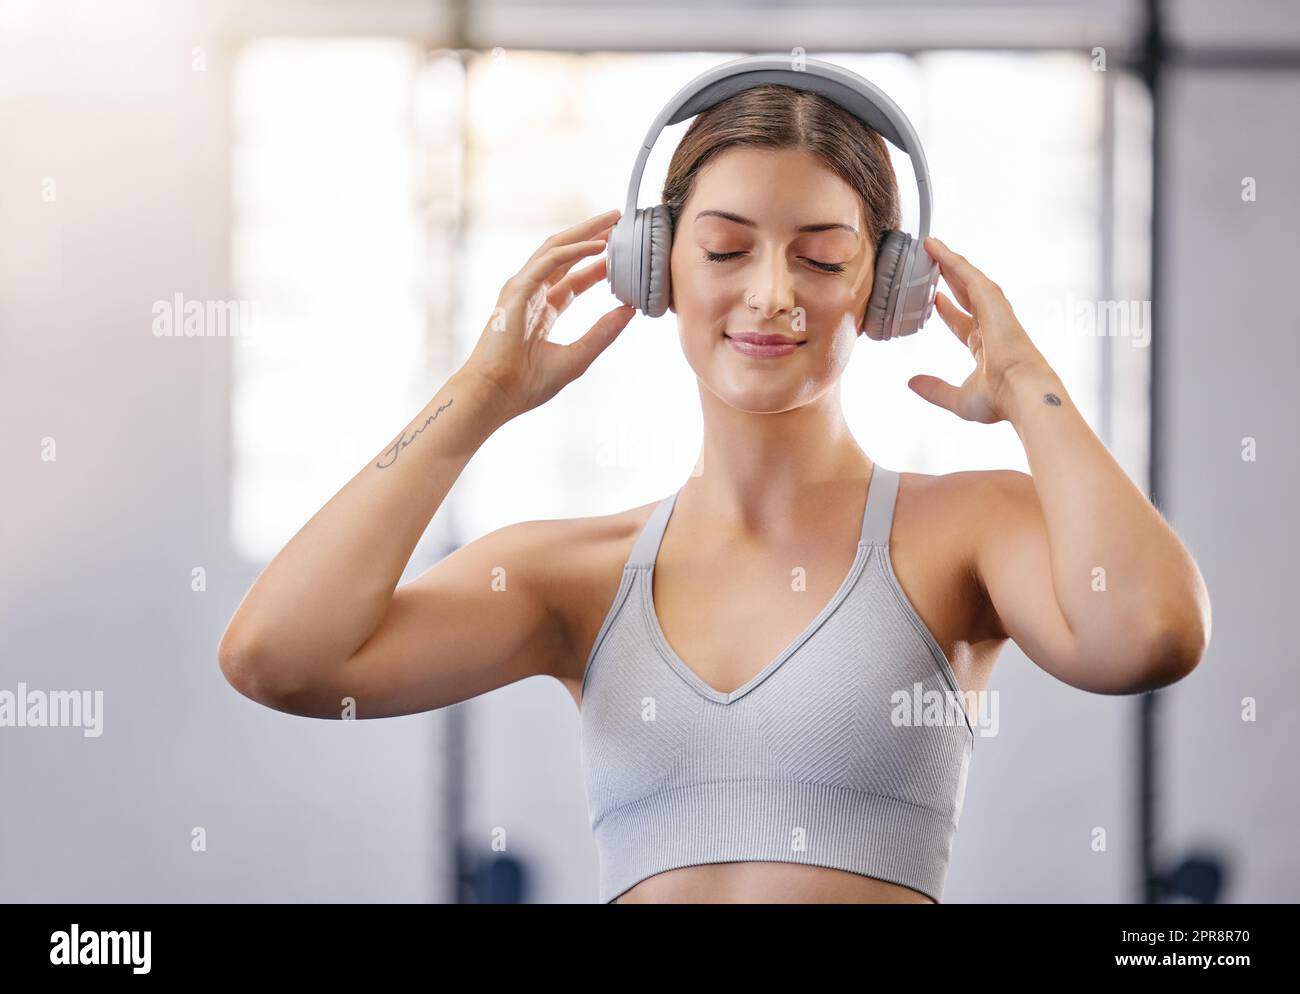 One active young caucasian woman listening to relaxing music with headphones while taking a break from exercise a gym. Female athlete staying motivated with calm music during her workout in a fitness centre Stock Photo